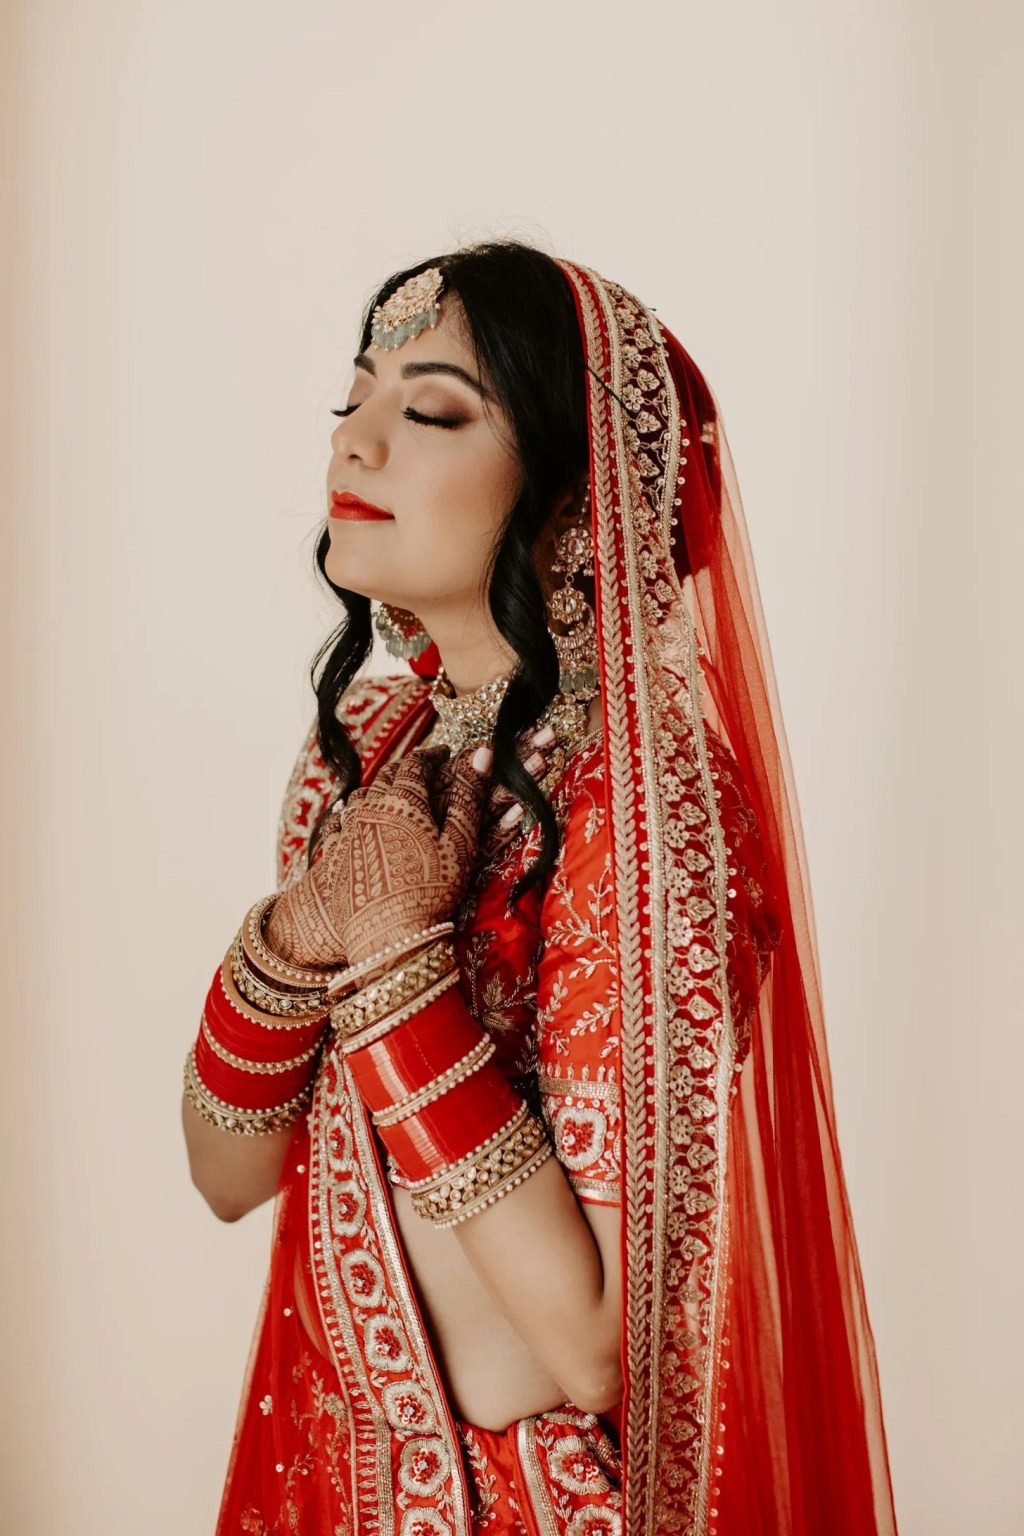 glam traditional Indian red wedding dresses with intricate nature inspired detailing